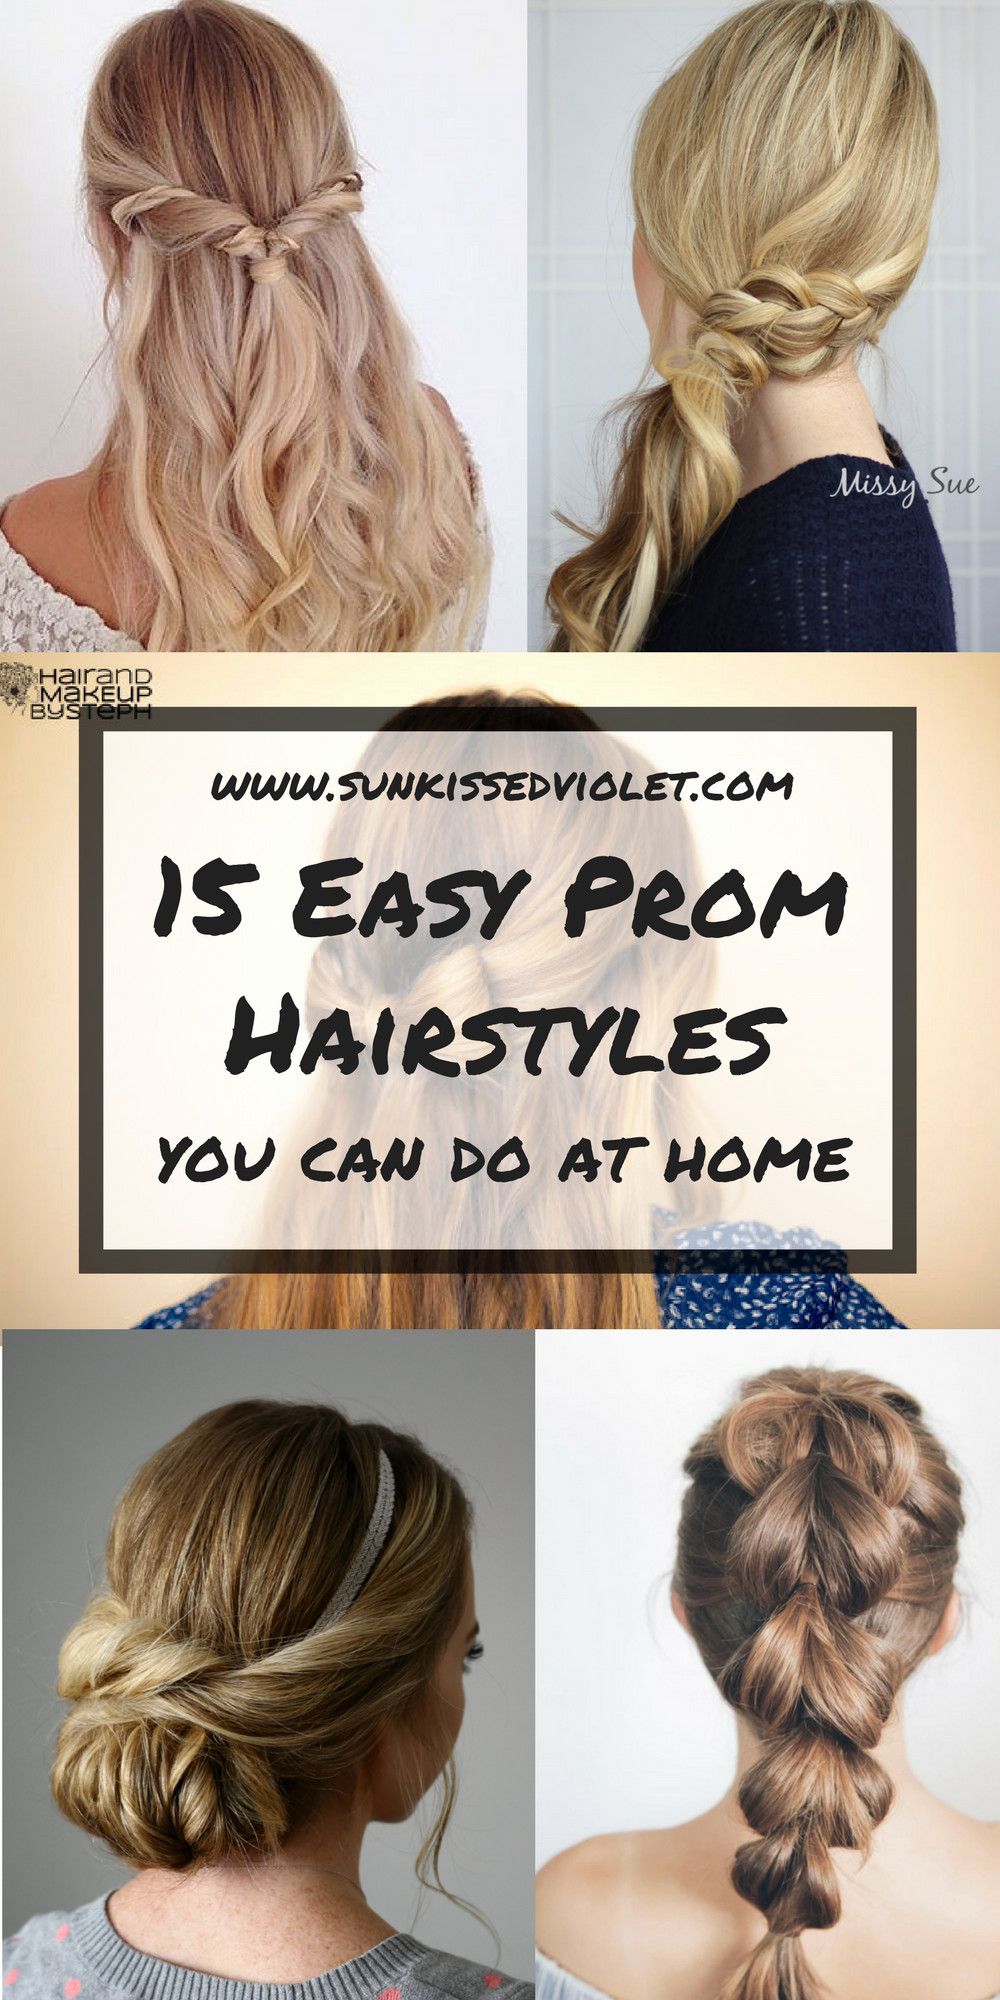 Easy Hairstyles At Home
 Great Ideas 23 Updo Hairstyles You Can Do At Home